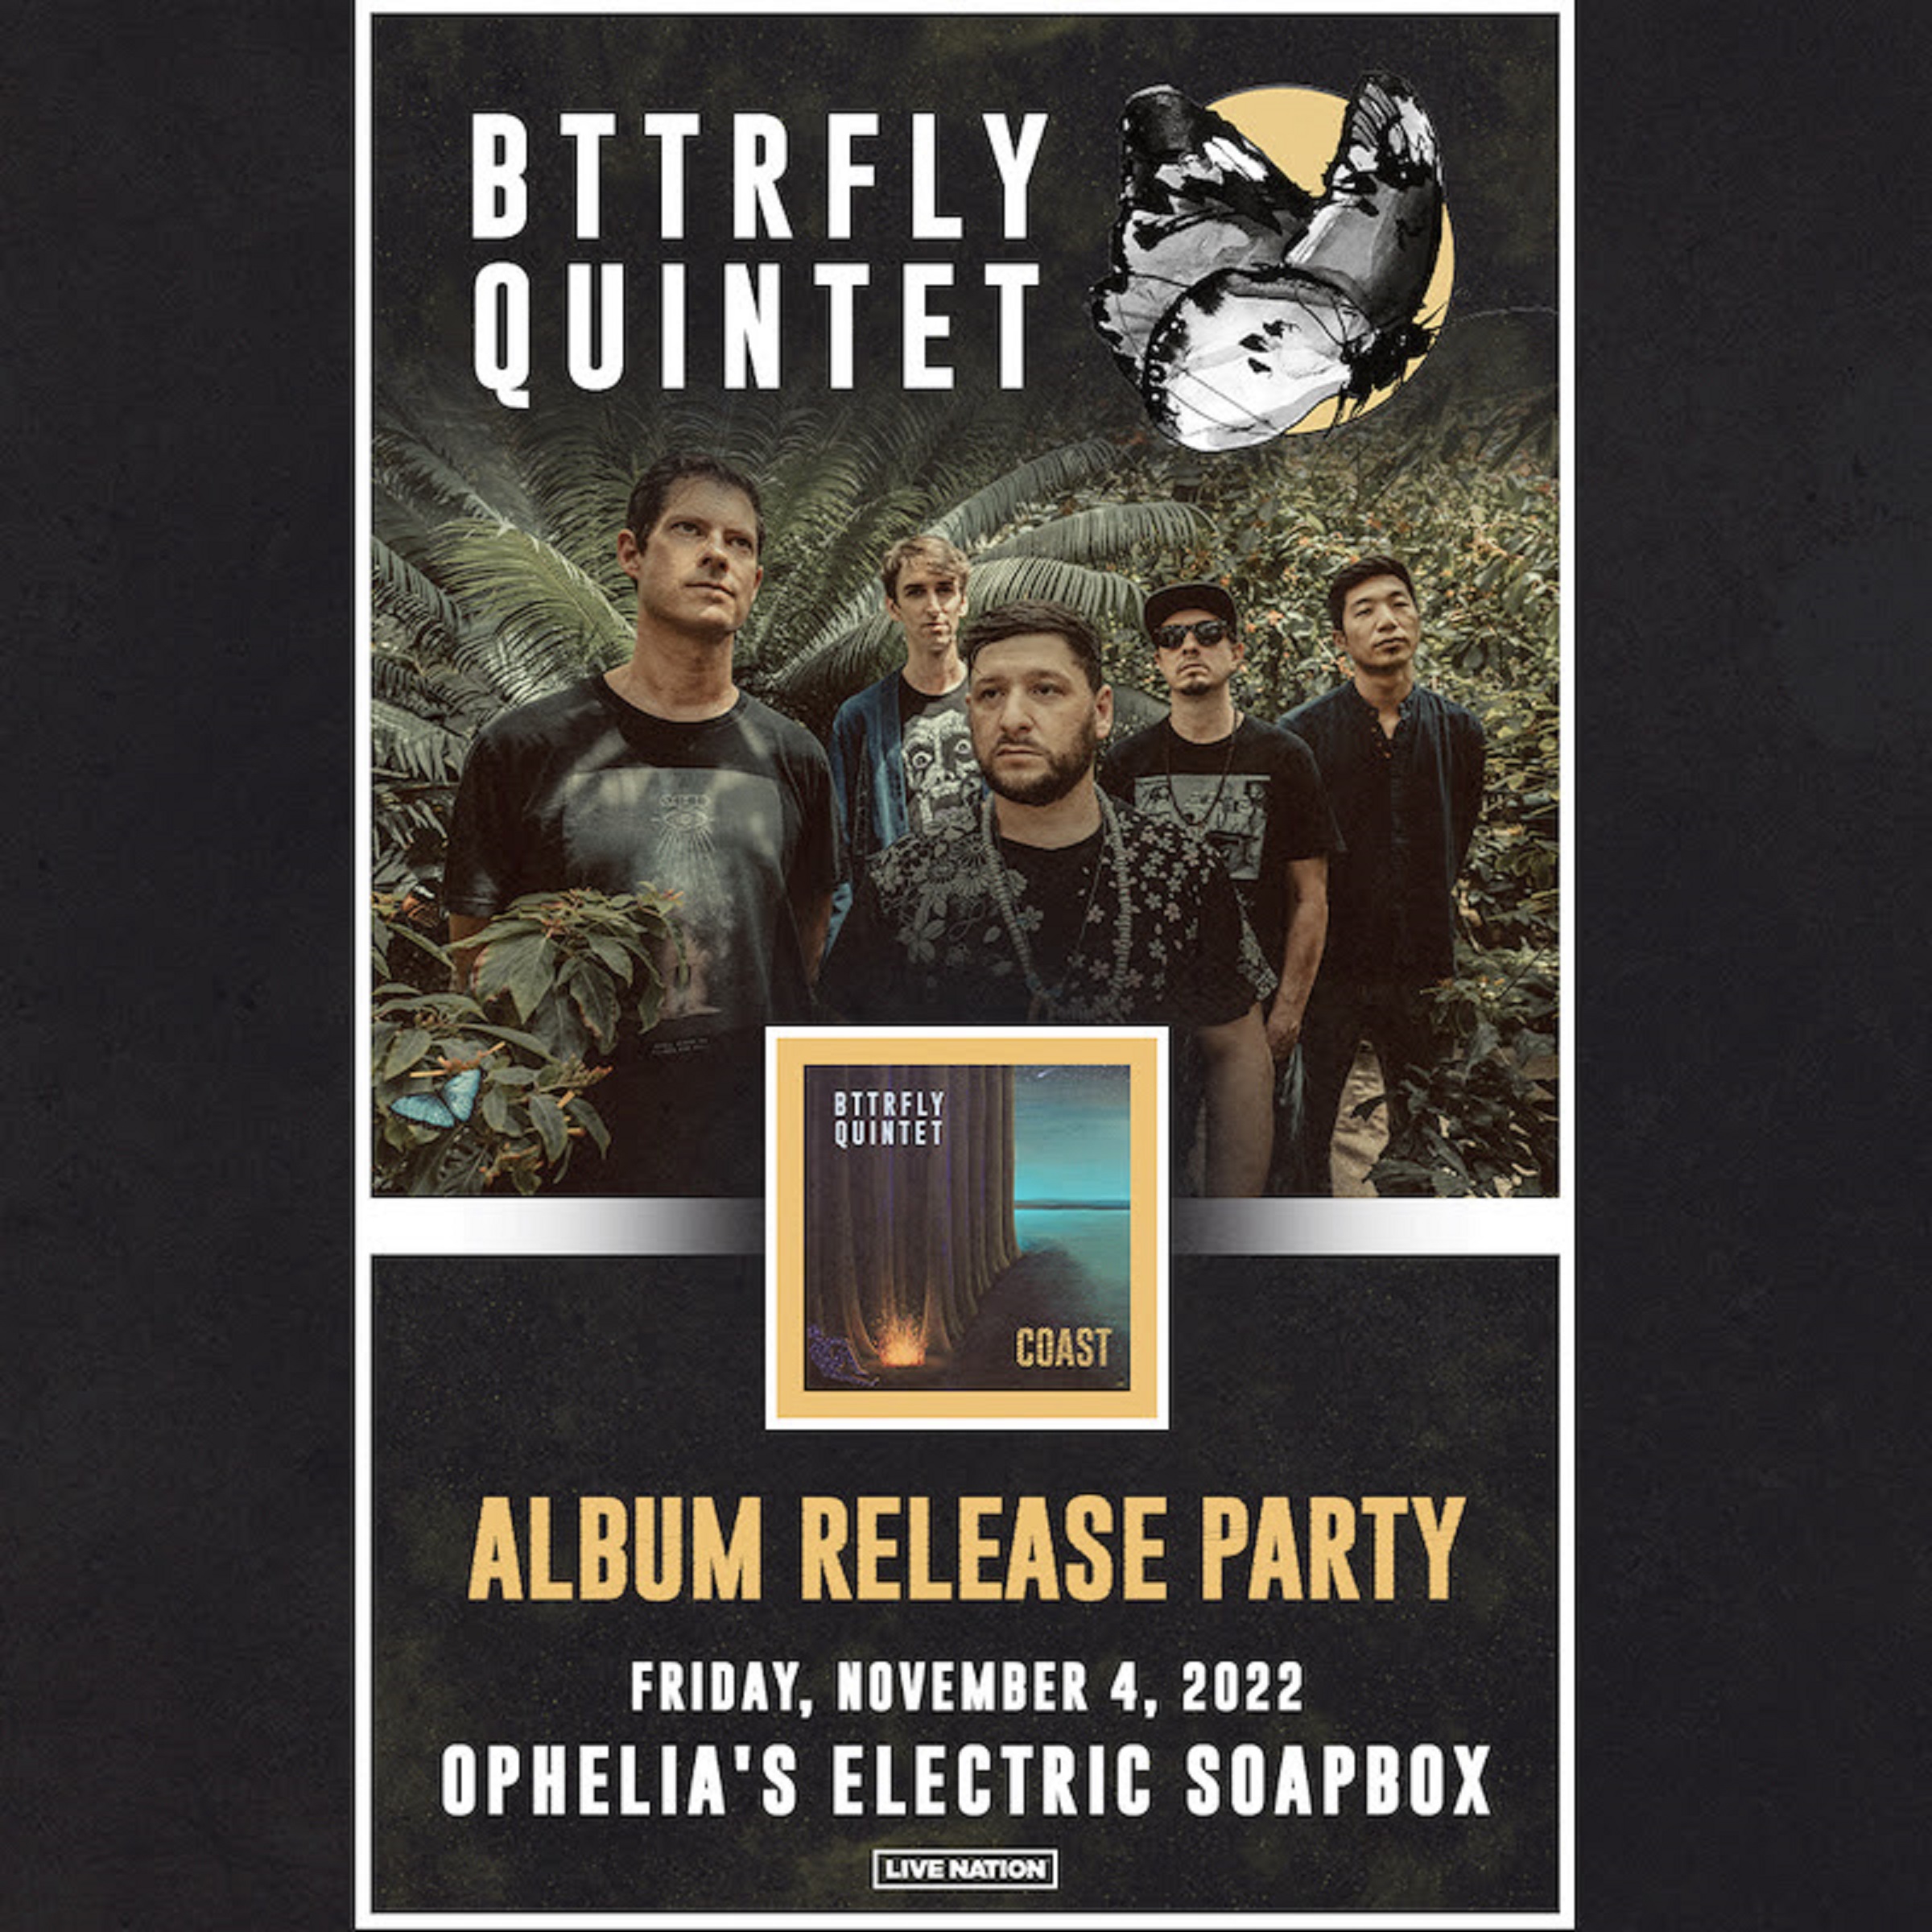 Lettuce and Big Gigantic members' jazz-supergroup BTTRFLY Quintet drop single ahead of debut LP